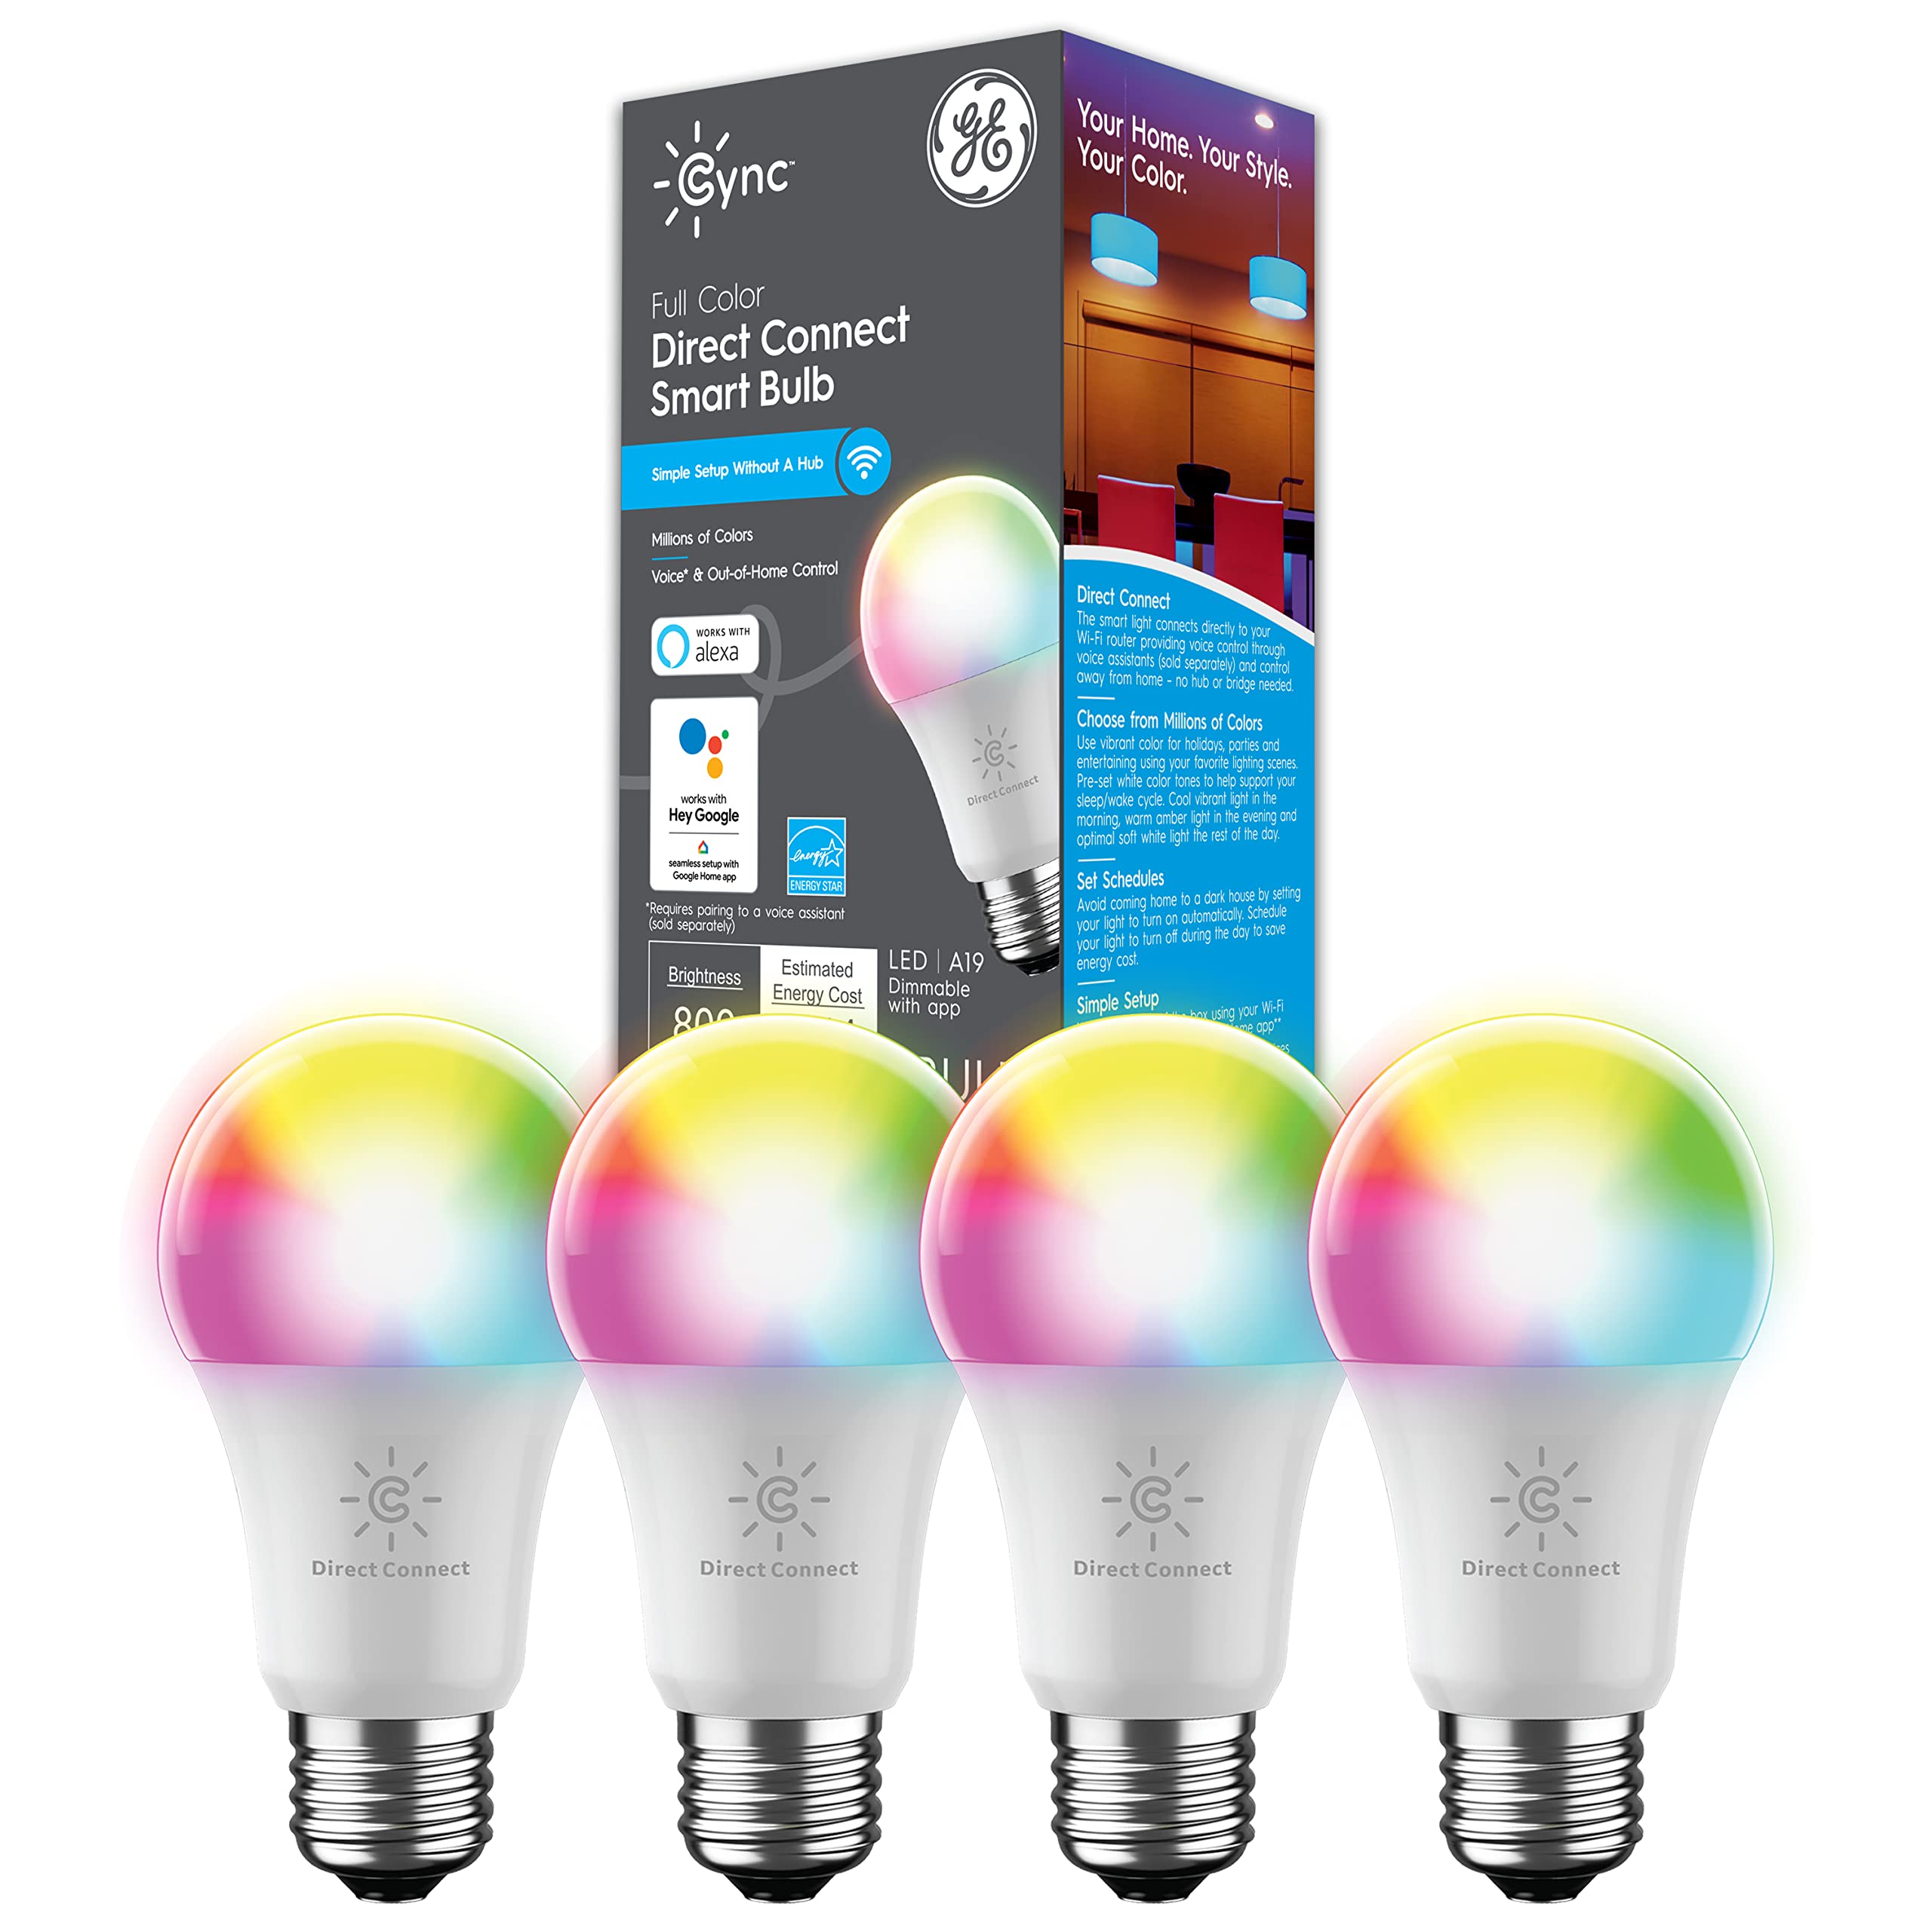 GE Lighting CYNC Smart LED Light Bulbs, Full Color, Bluetooth and Wi-Fi Enabled, Compatible with Alexa and Google Home, A19 Bulbs (Pack of 4)